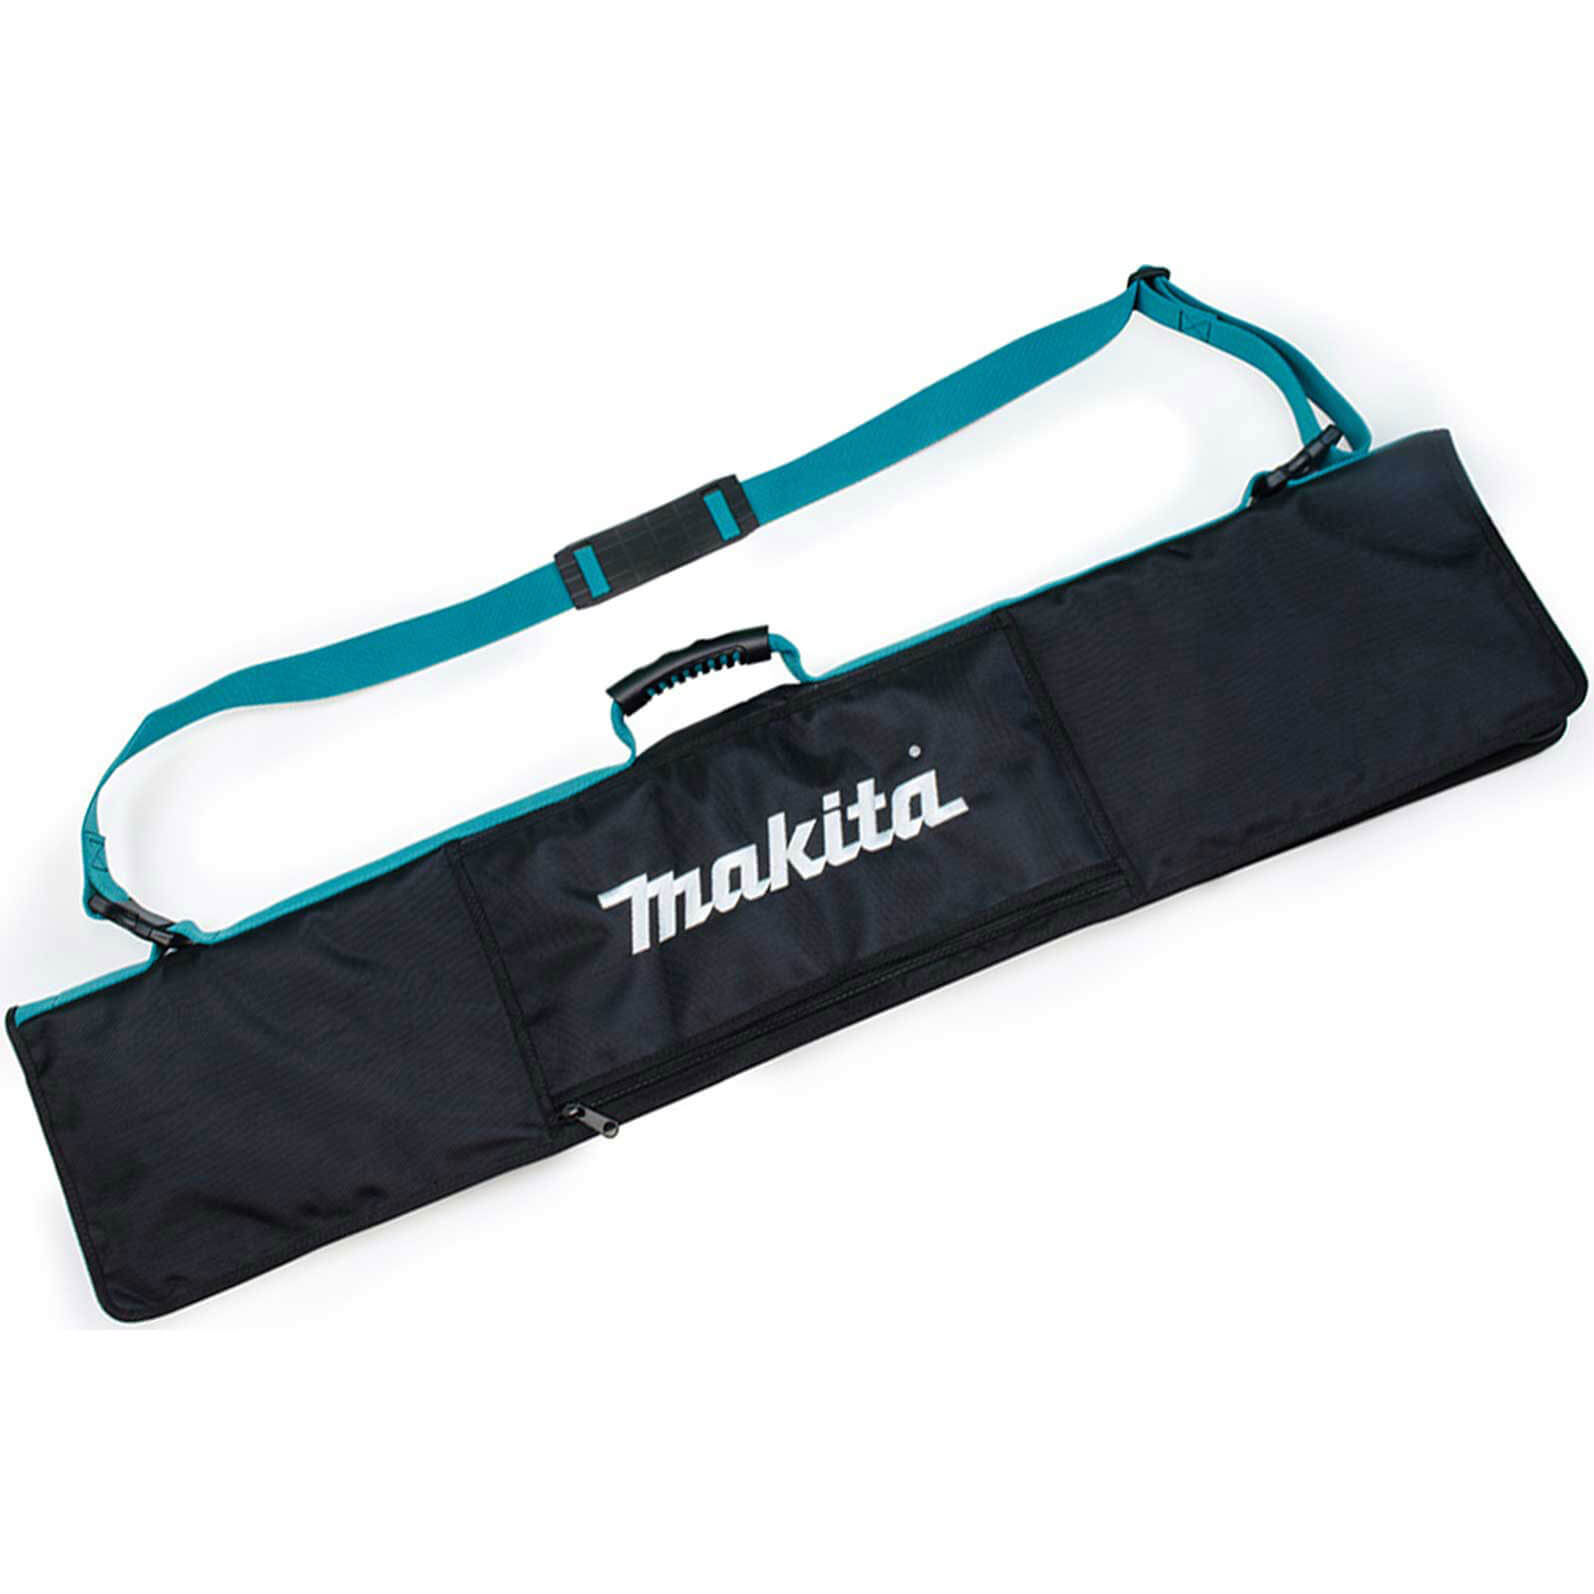 Makita Plunge Saw Guide Rail Carry Bag | Guide Rail Accessories